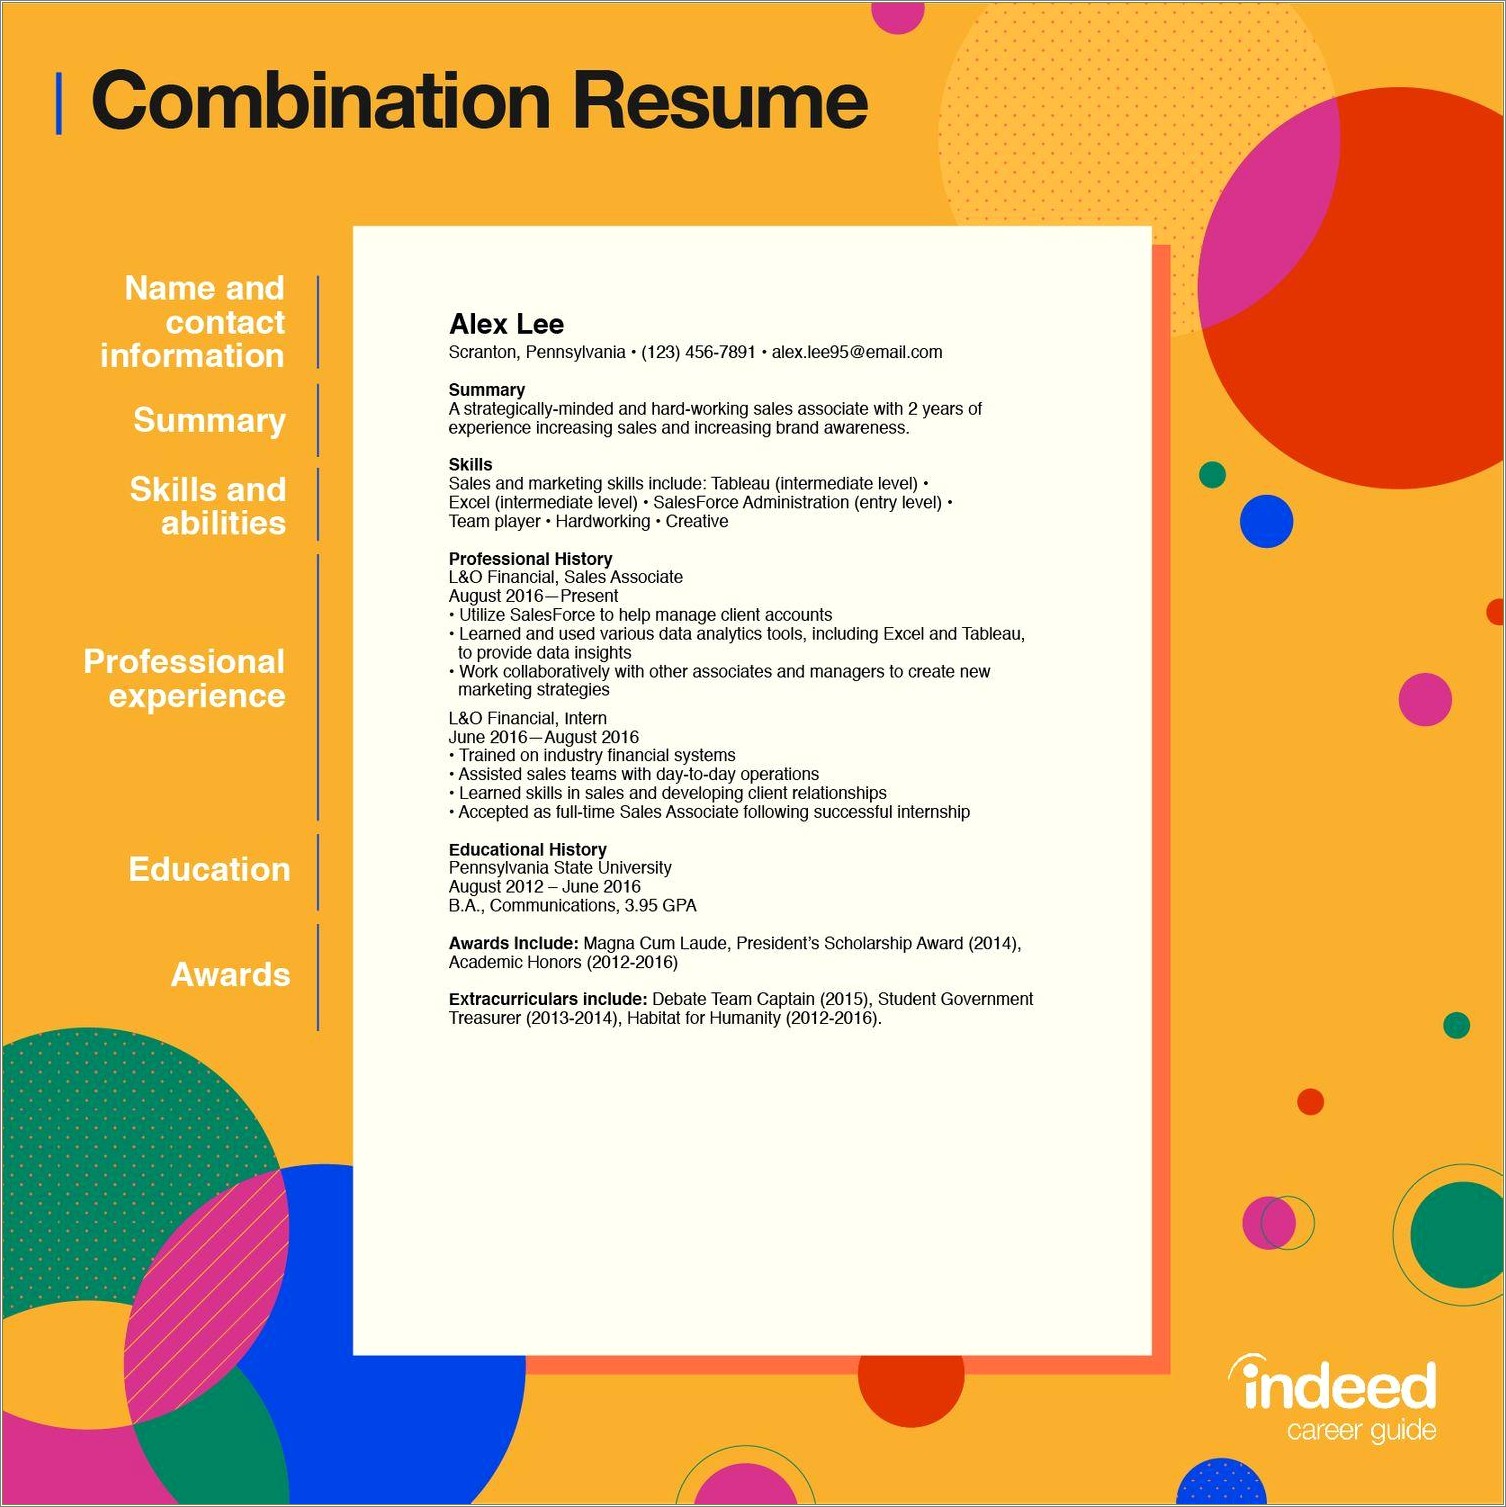 Prepare Your Resume With Job Application